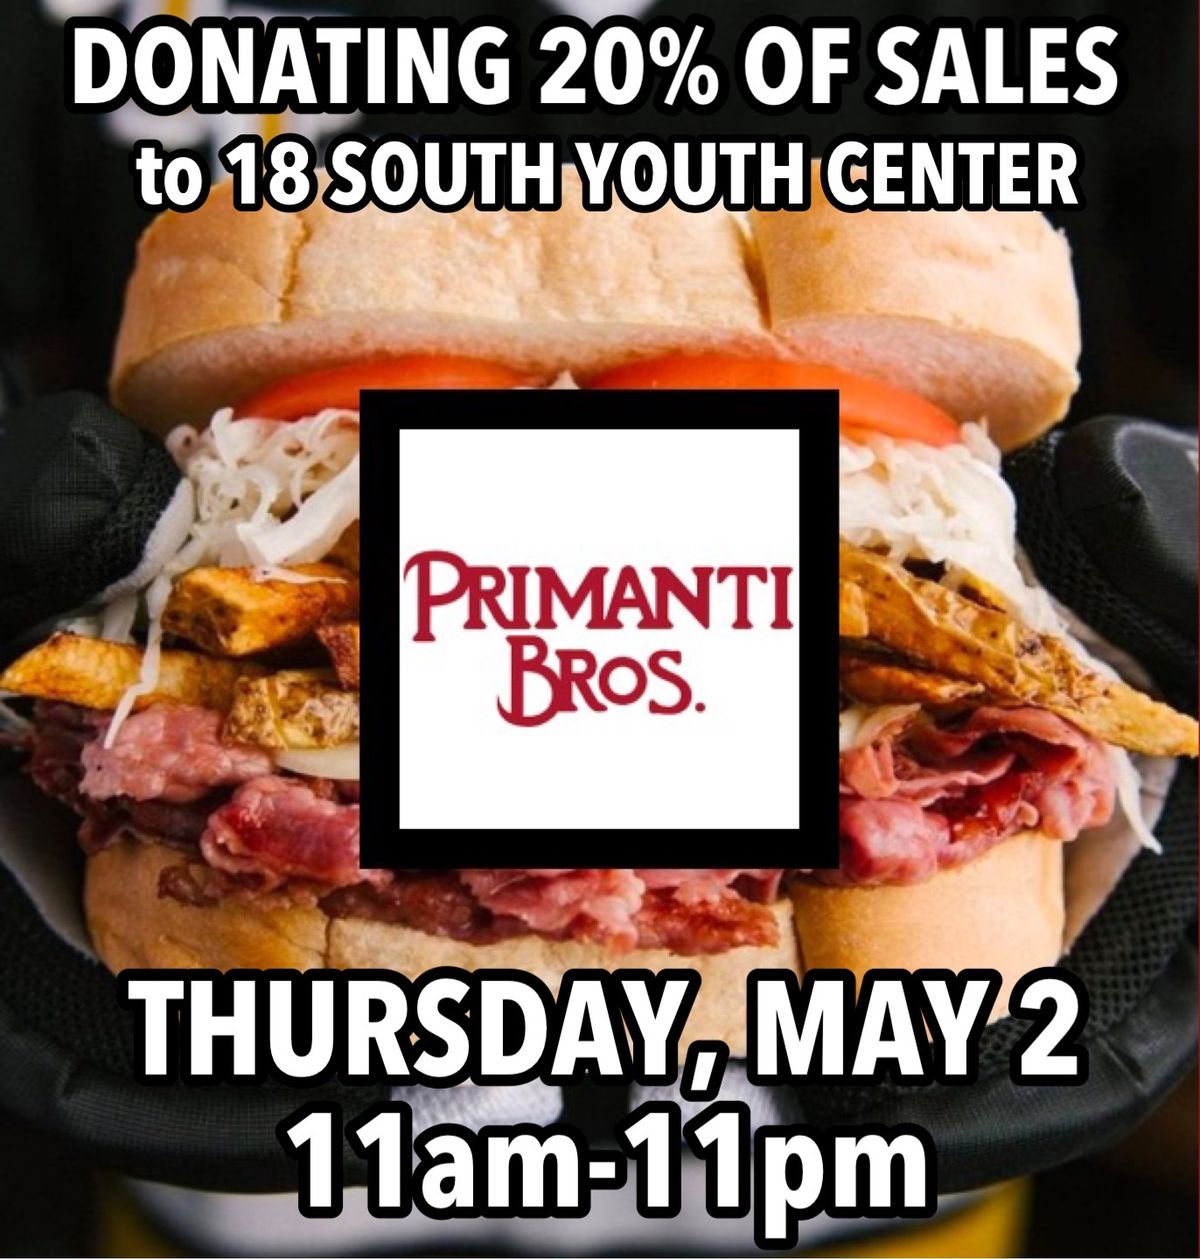 Primanti Bros. Fundraiser for 18 South Youth Center